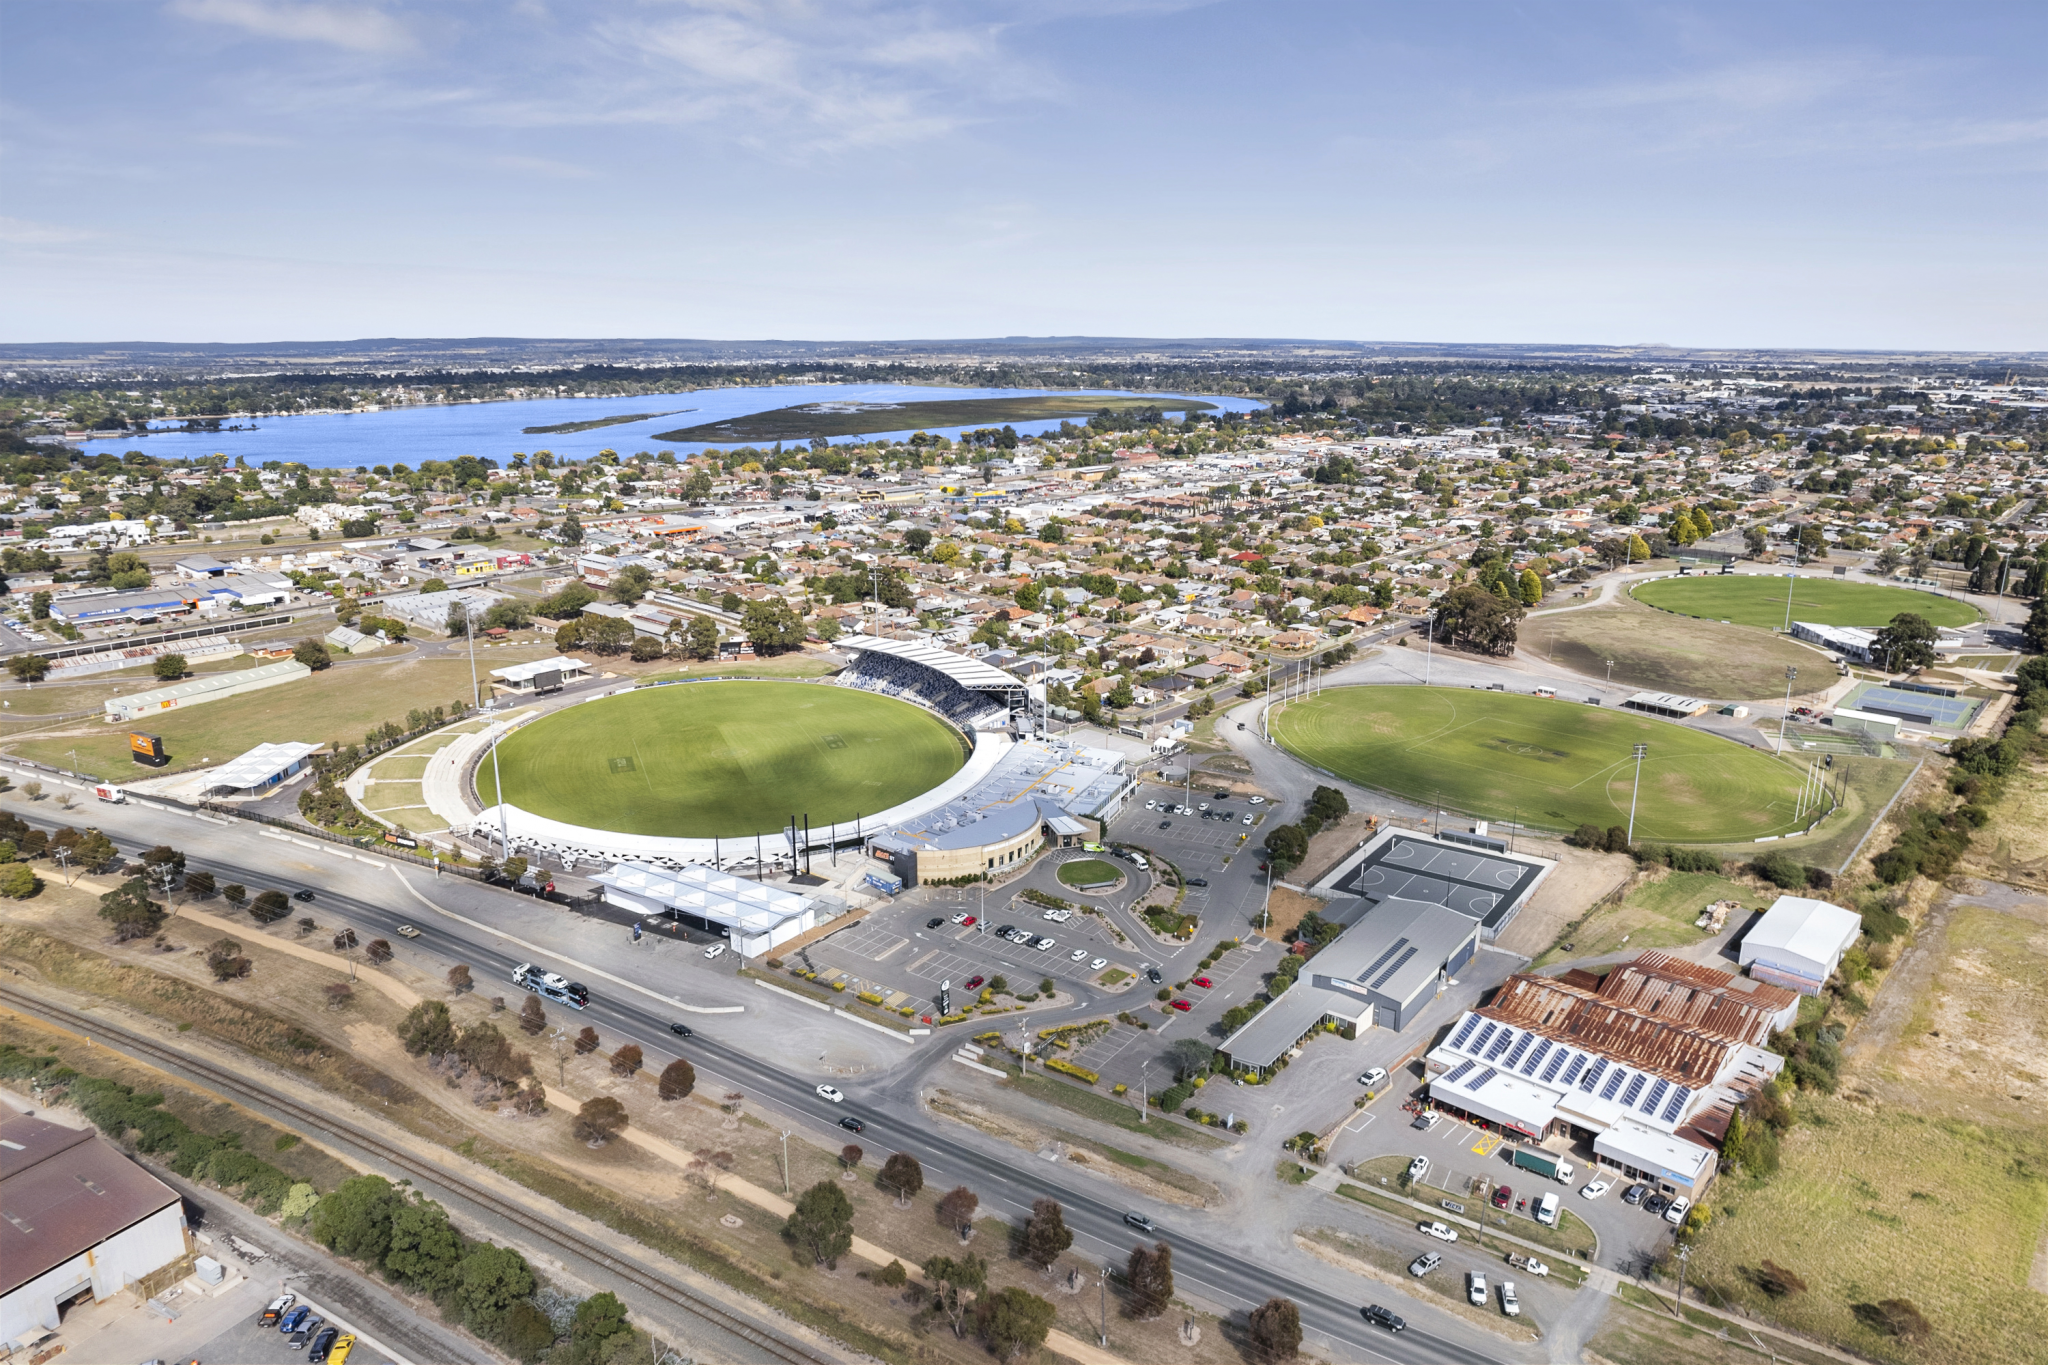 Despite using existing venues, such as those in Ballarat, Victoria's hosting of the 2026 Commonwealth Games was cancelled due to increasing costs ©City of Ballarat